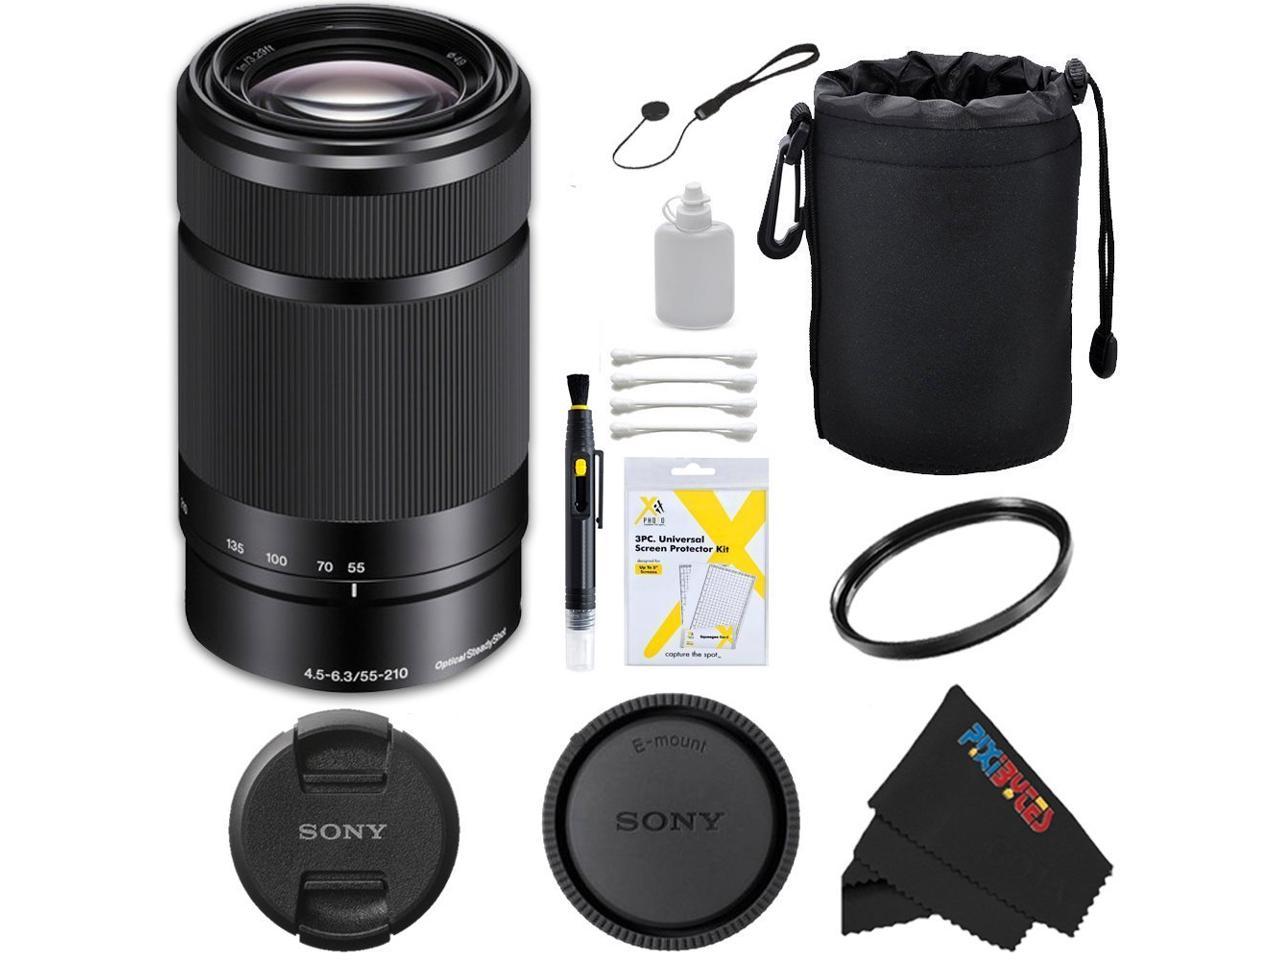 Sony E 55-210mm F4.5-6.3 OSS Lens for Sony E-Mount Cameras (Frustration Free Packaging) + Pixi-Basic Accessory Bundle